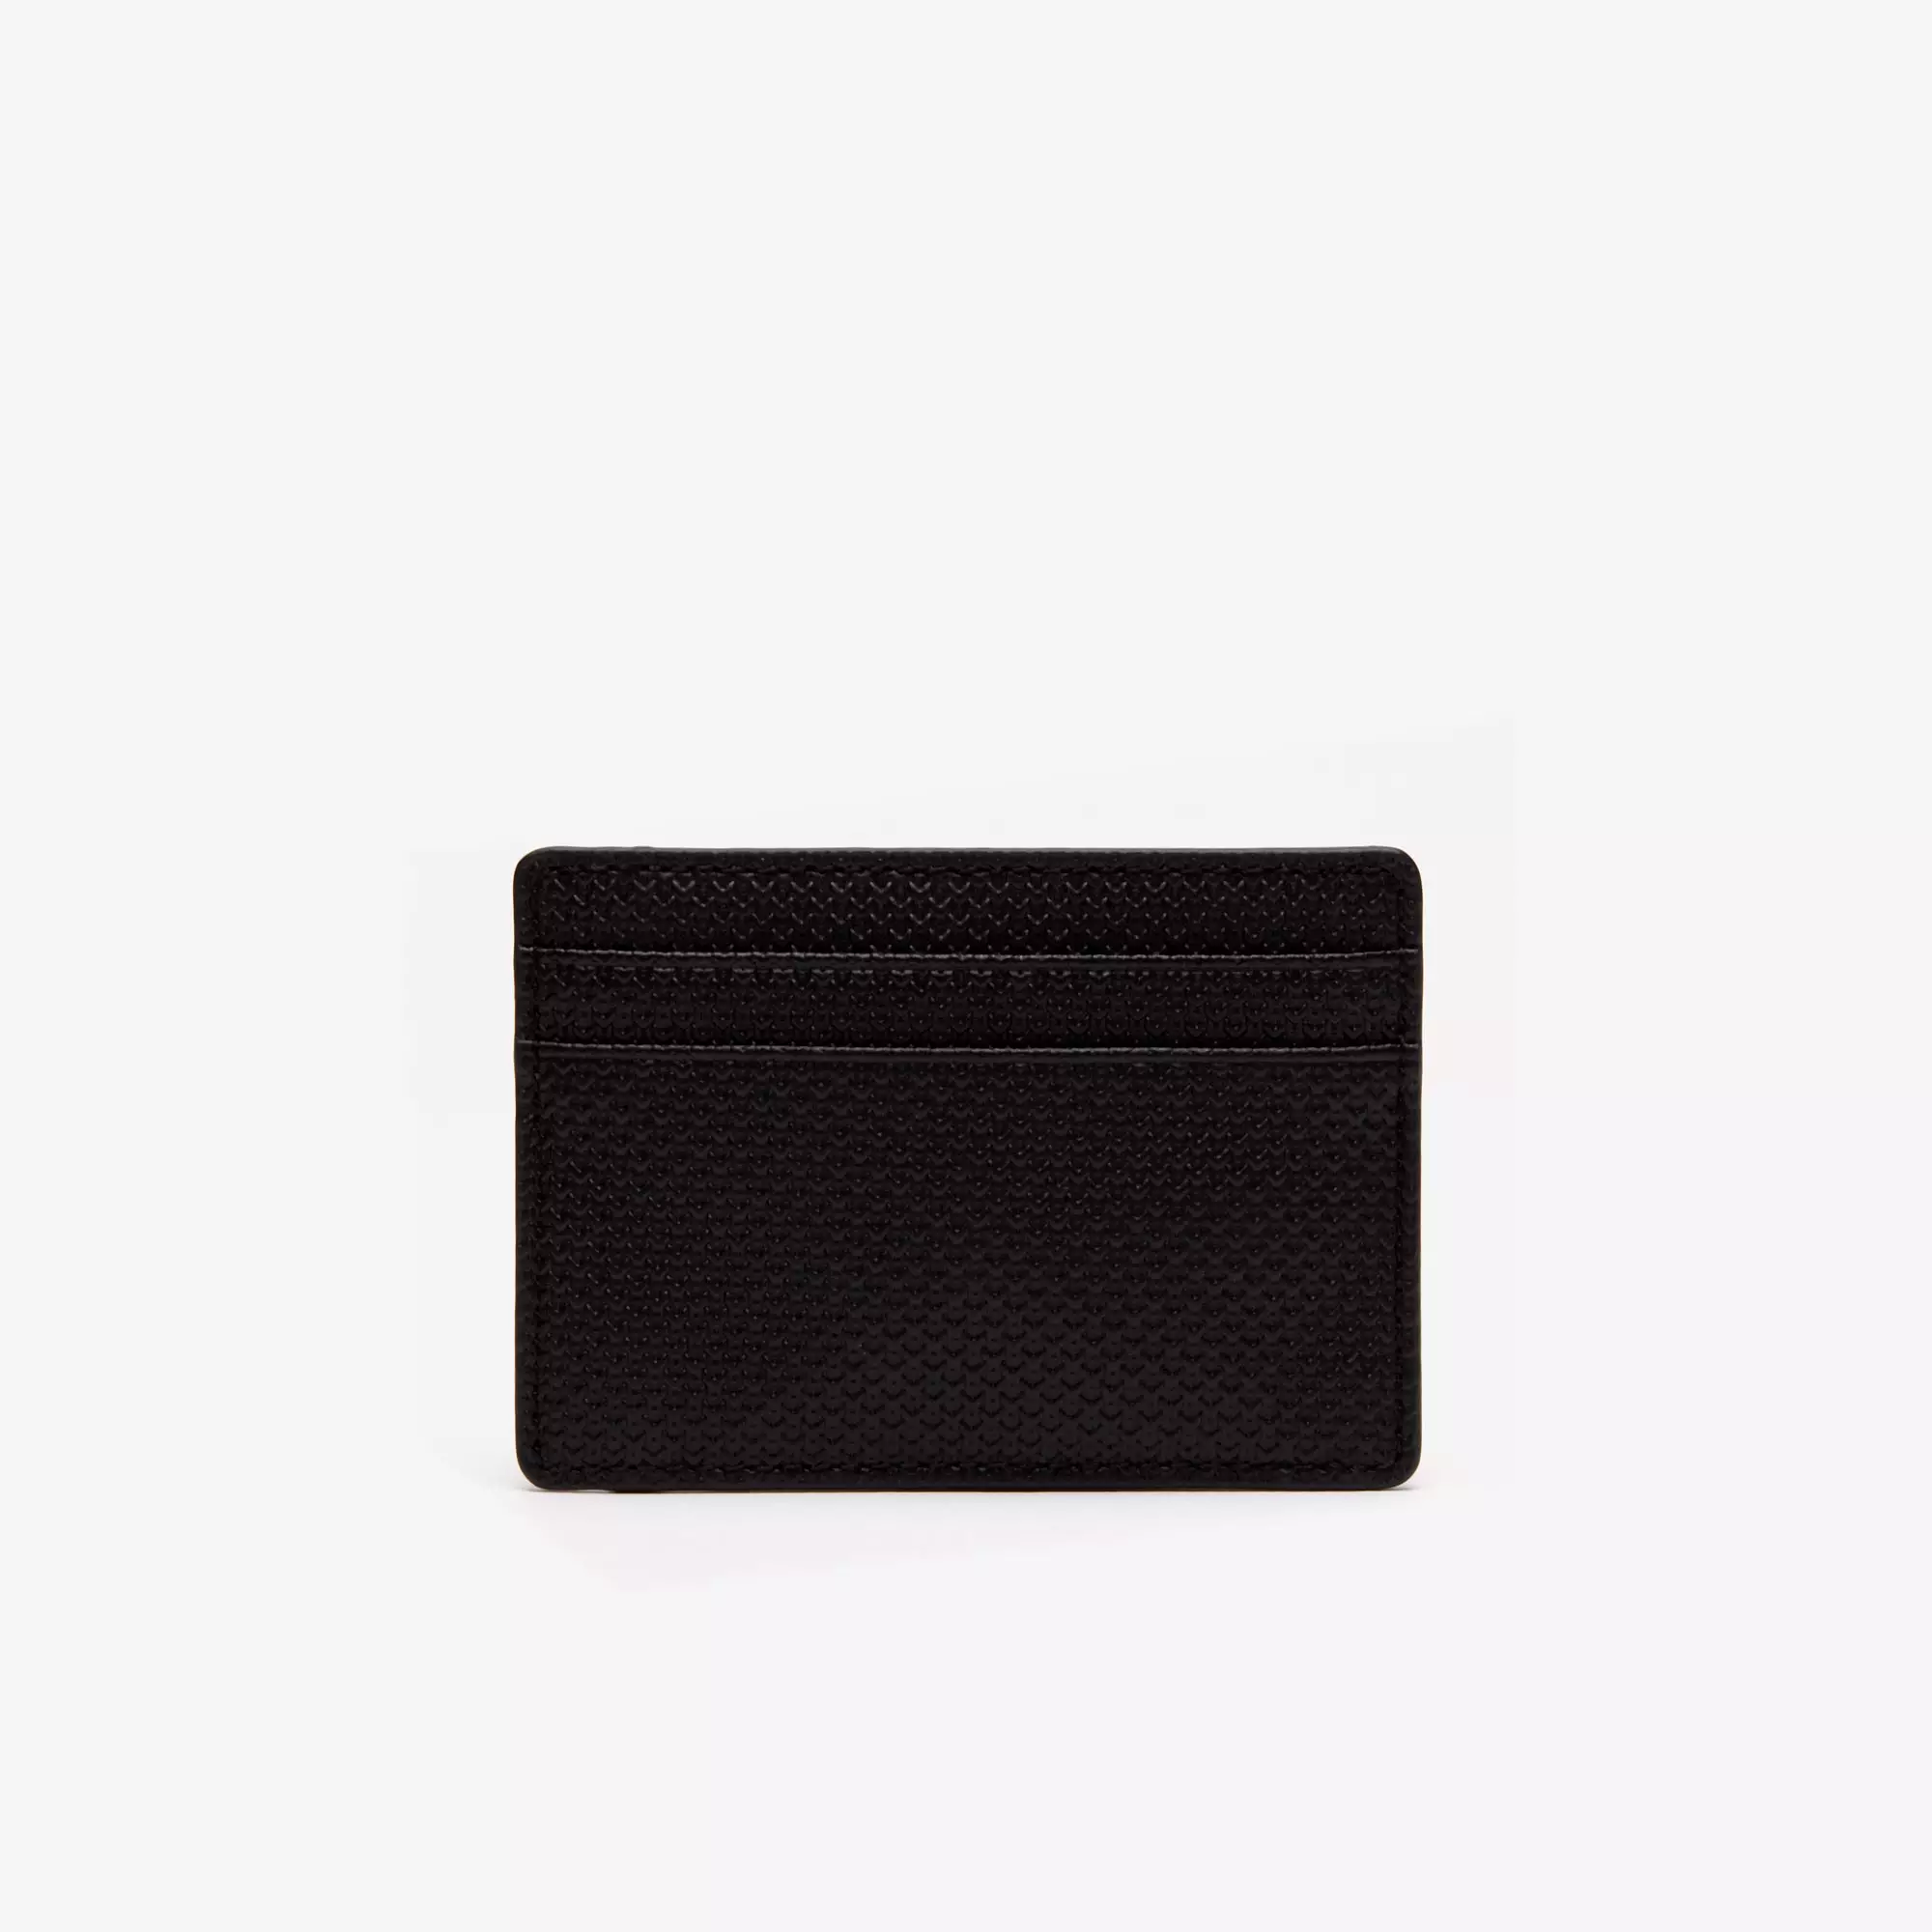 Jual Lacoste Lacoste Men's Chantaco Piqué Leather 8 Card Holder And ...